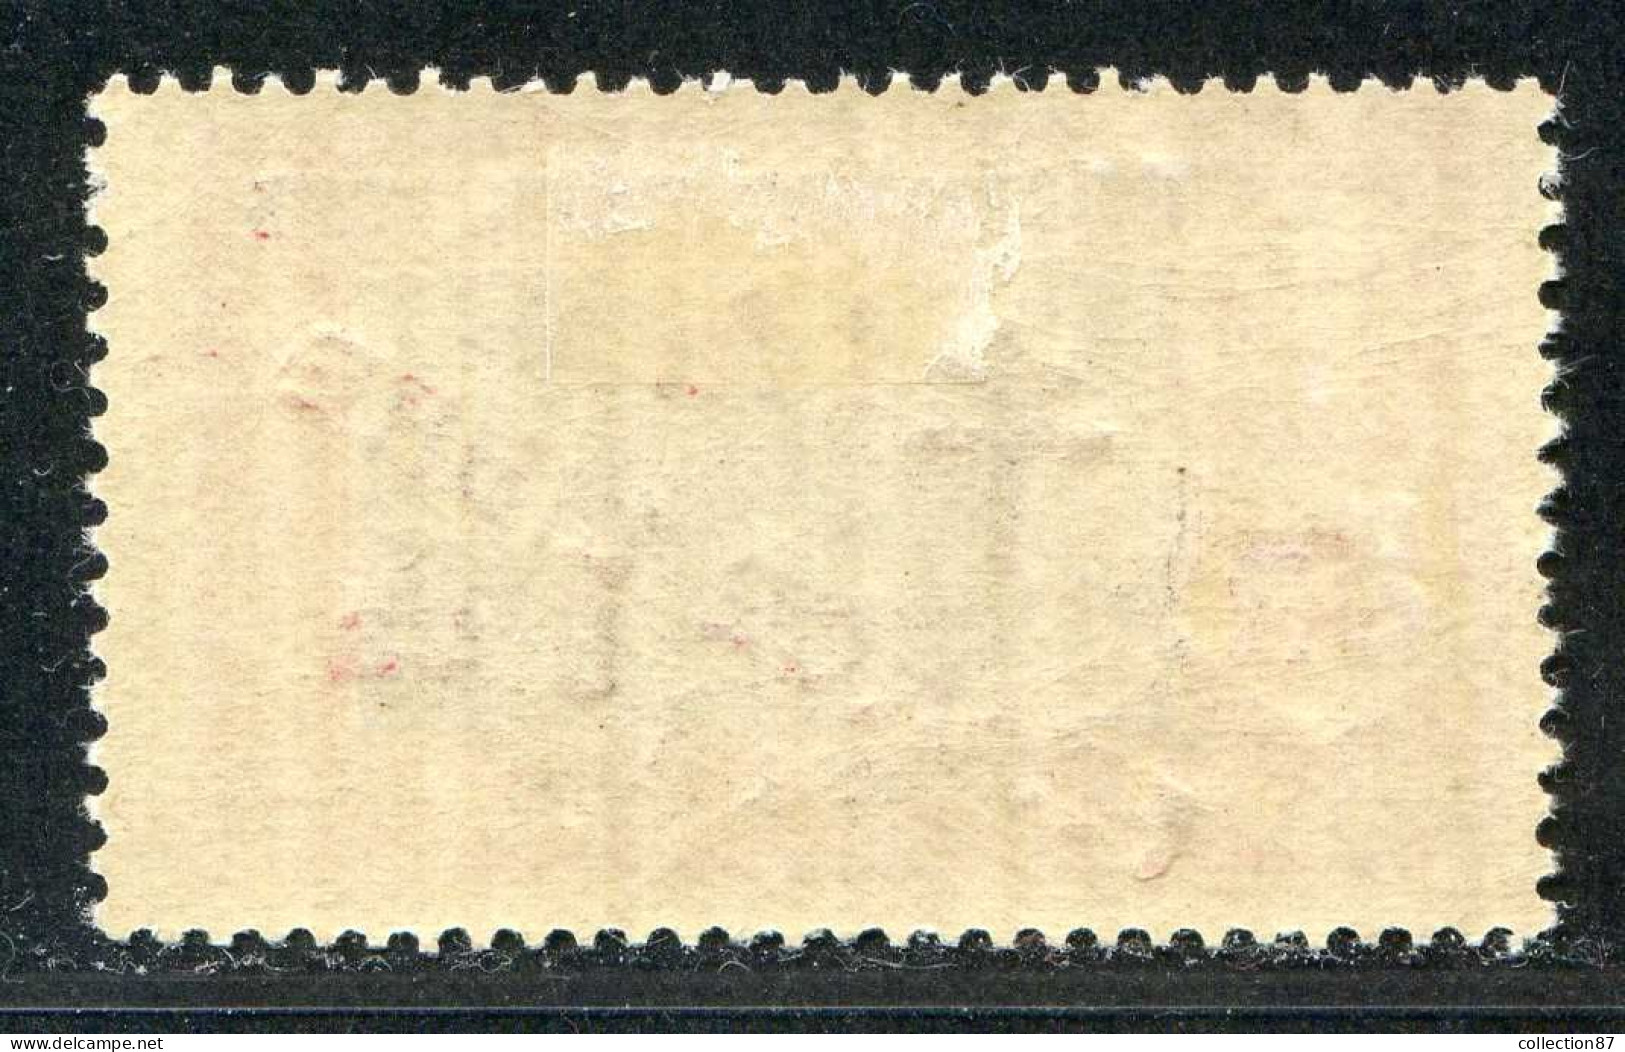 Réf 75 CL2 < -- INDE - FRANCE LIBRE < N° 212 * NEUF Ch.Dos Visible MH * - Unused Stamps